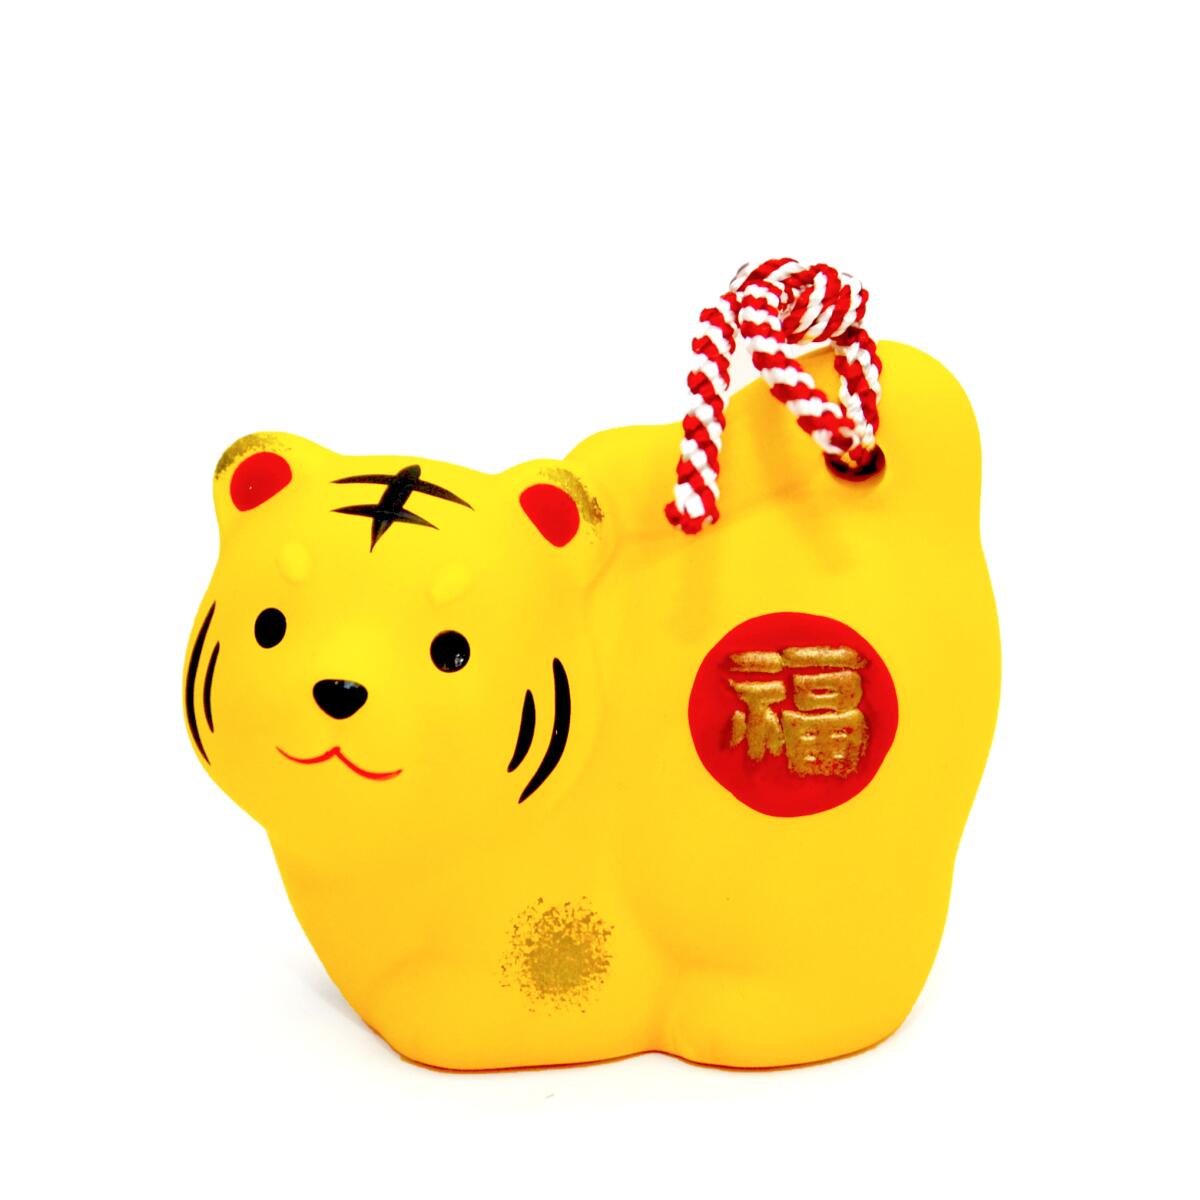 A yellow, tiger-shaped bell ornament